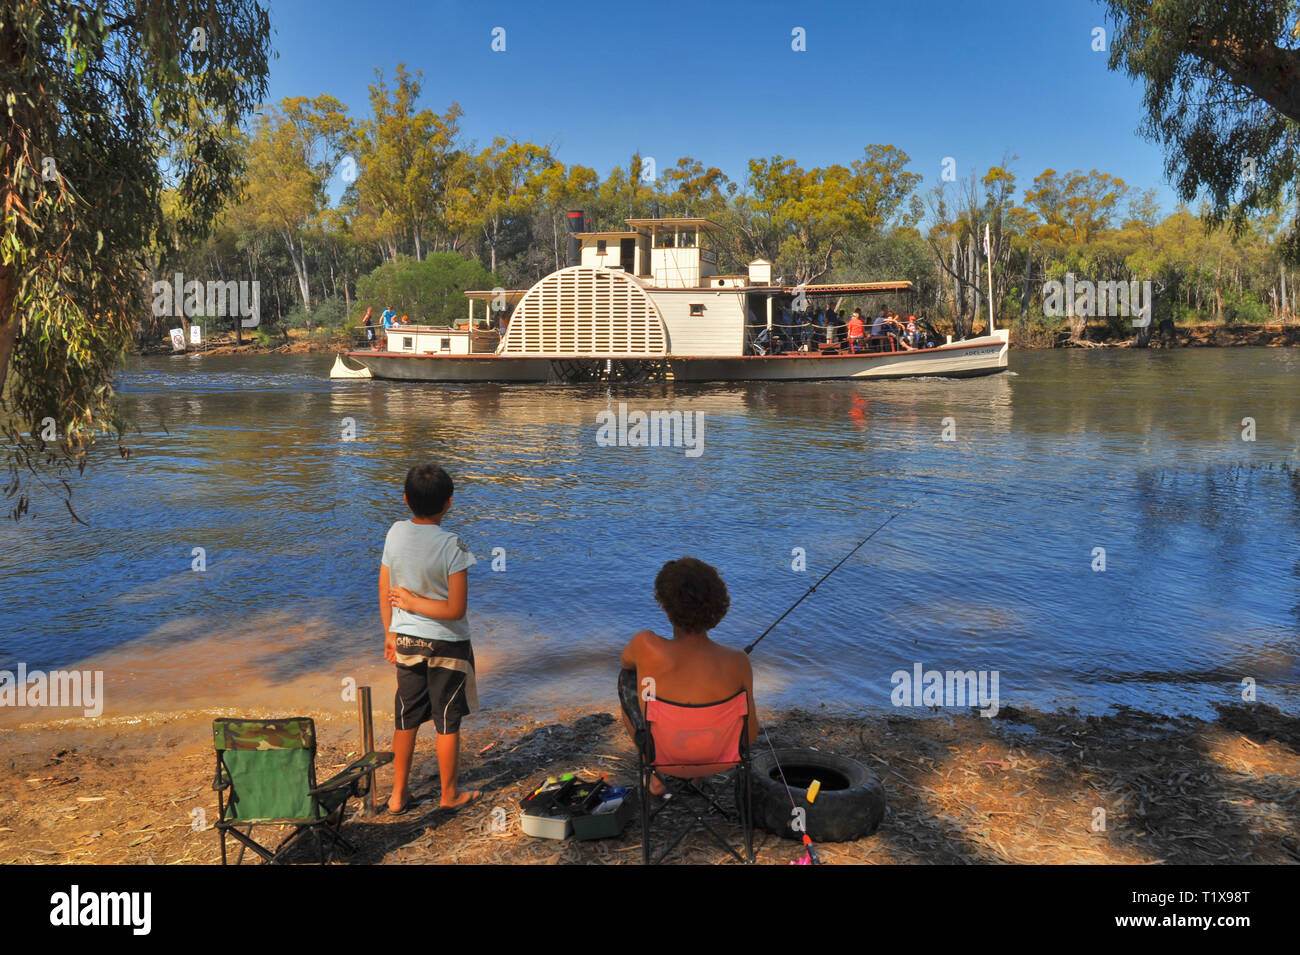 Restored paddle steamer 'Adelaide' on the Adelaide River in South Australia. Two kids fishing watch from shore, Eucalyptus trees at rivers edge. Stock Photo